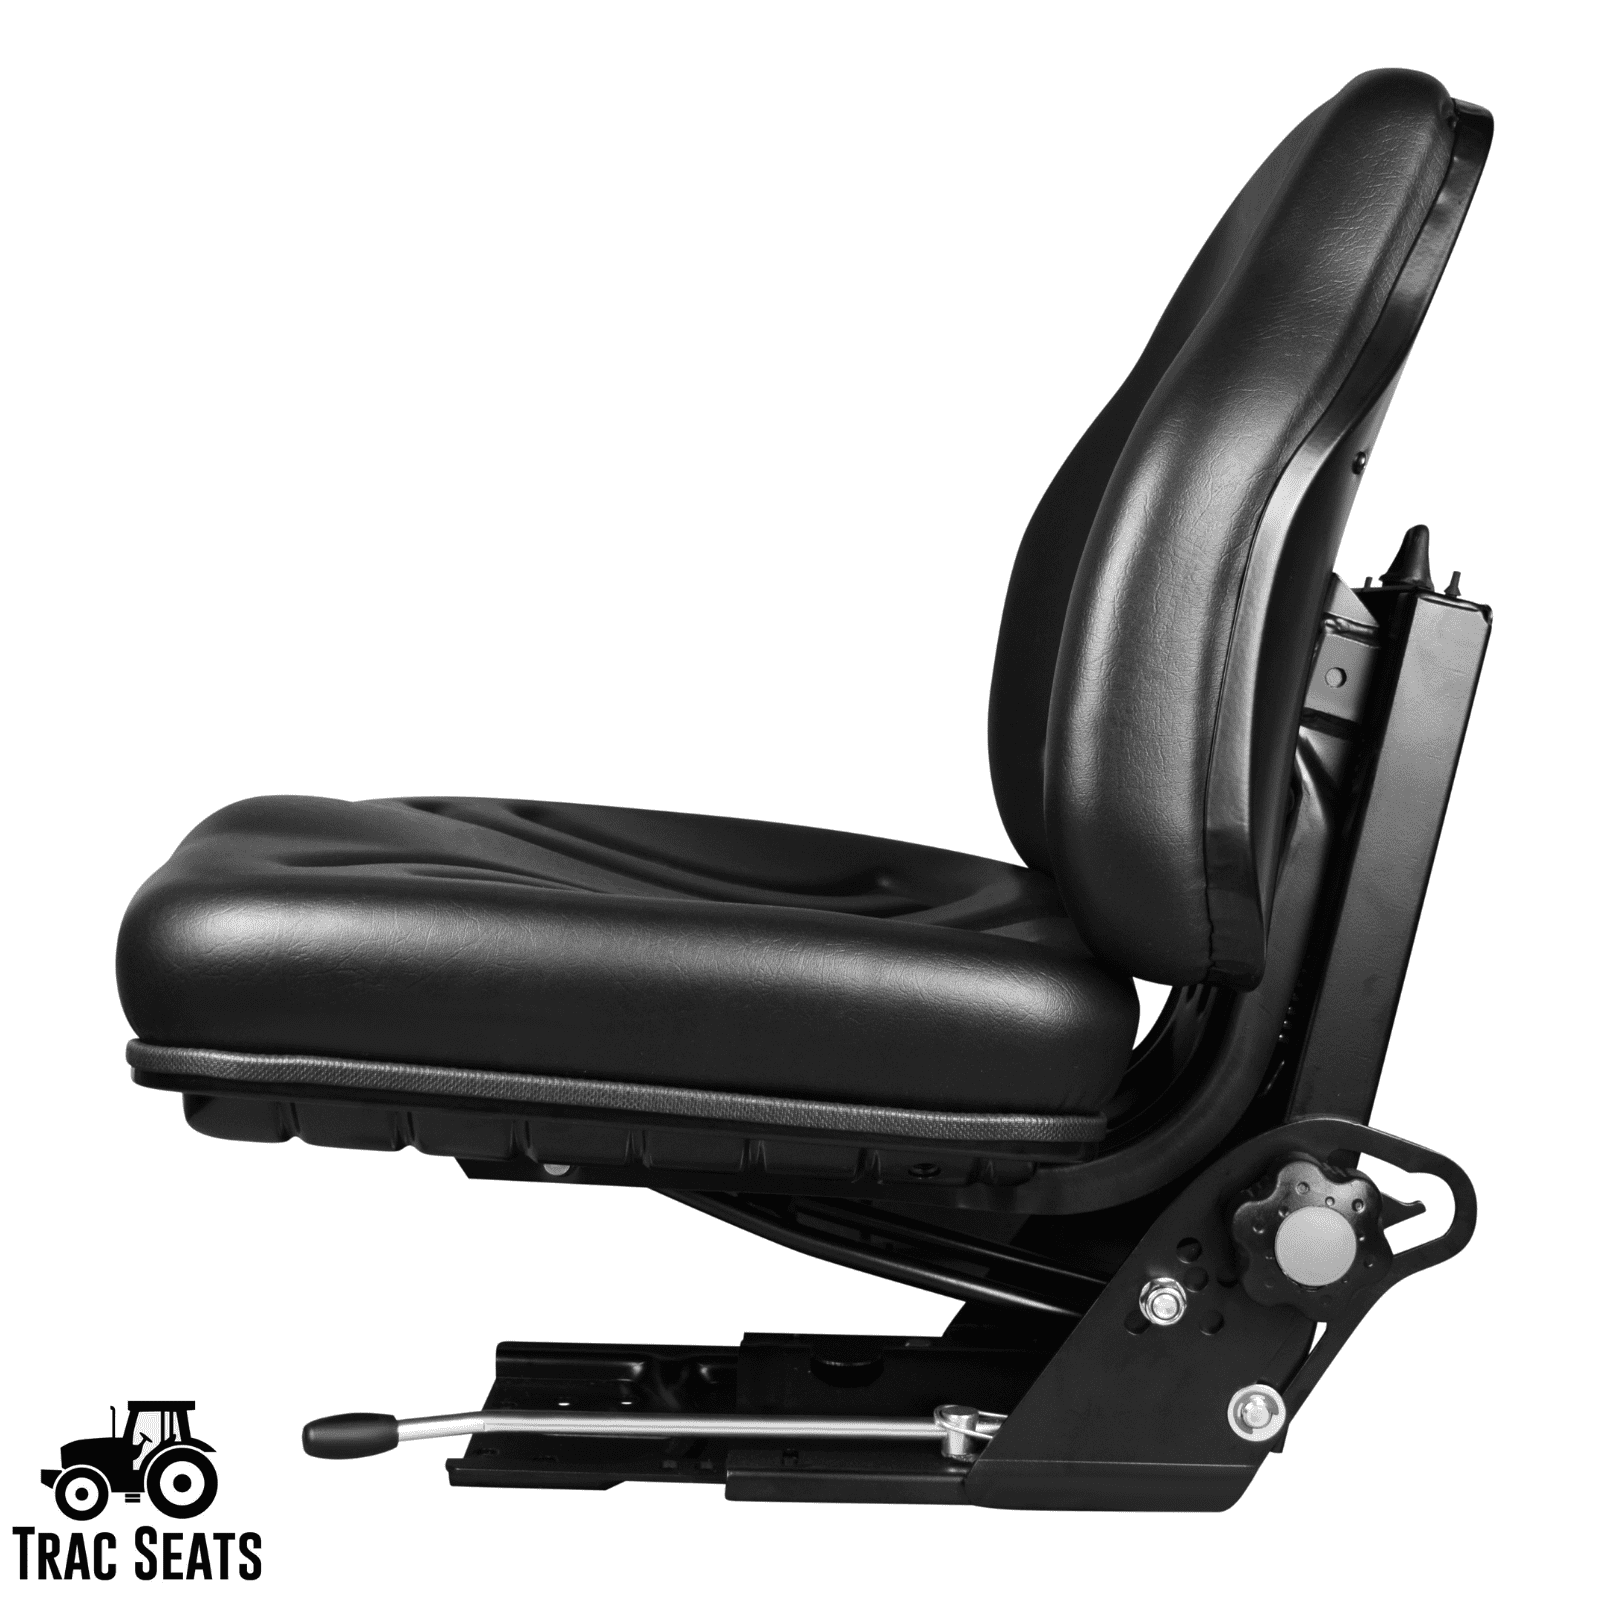 TRAC SEATS Black Suspension Seat for John Deere 5103 5200 5203 5210 5220 Tractor Same Day Shipping